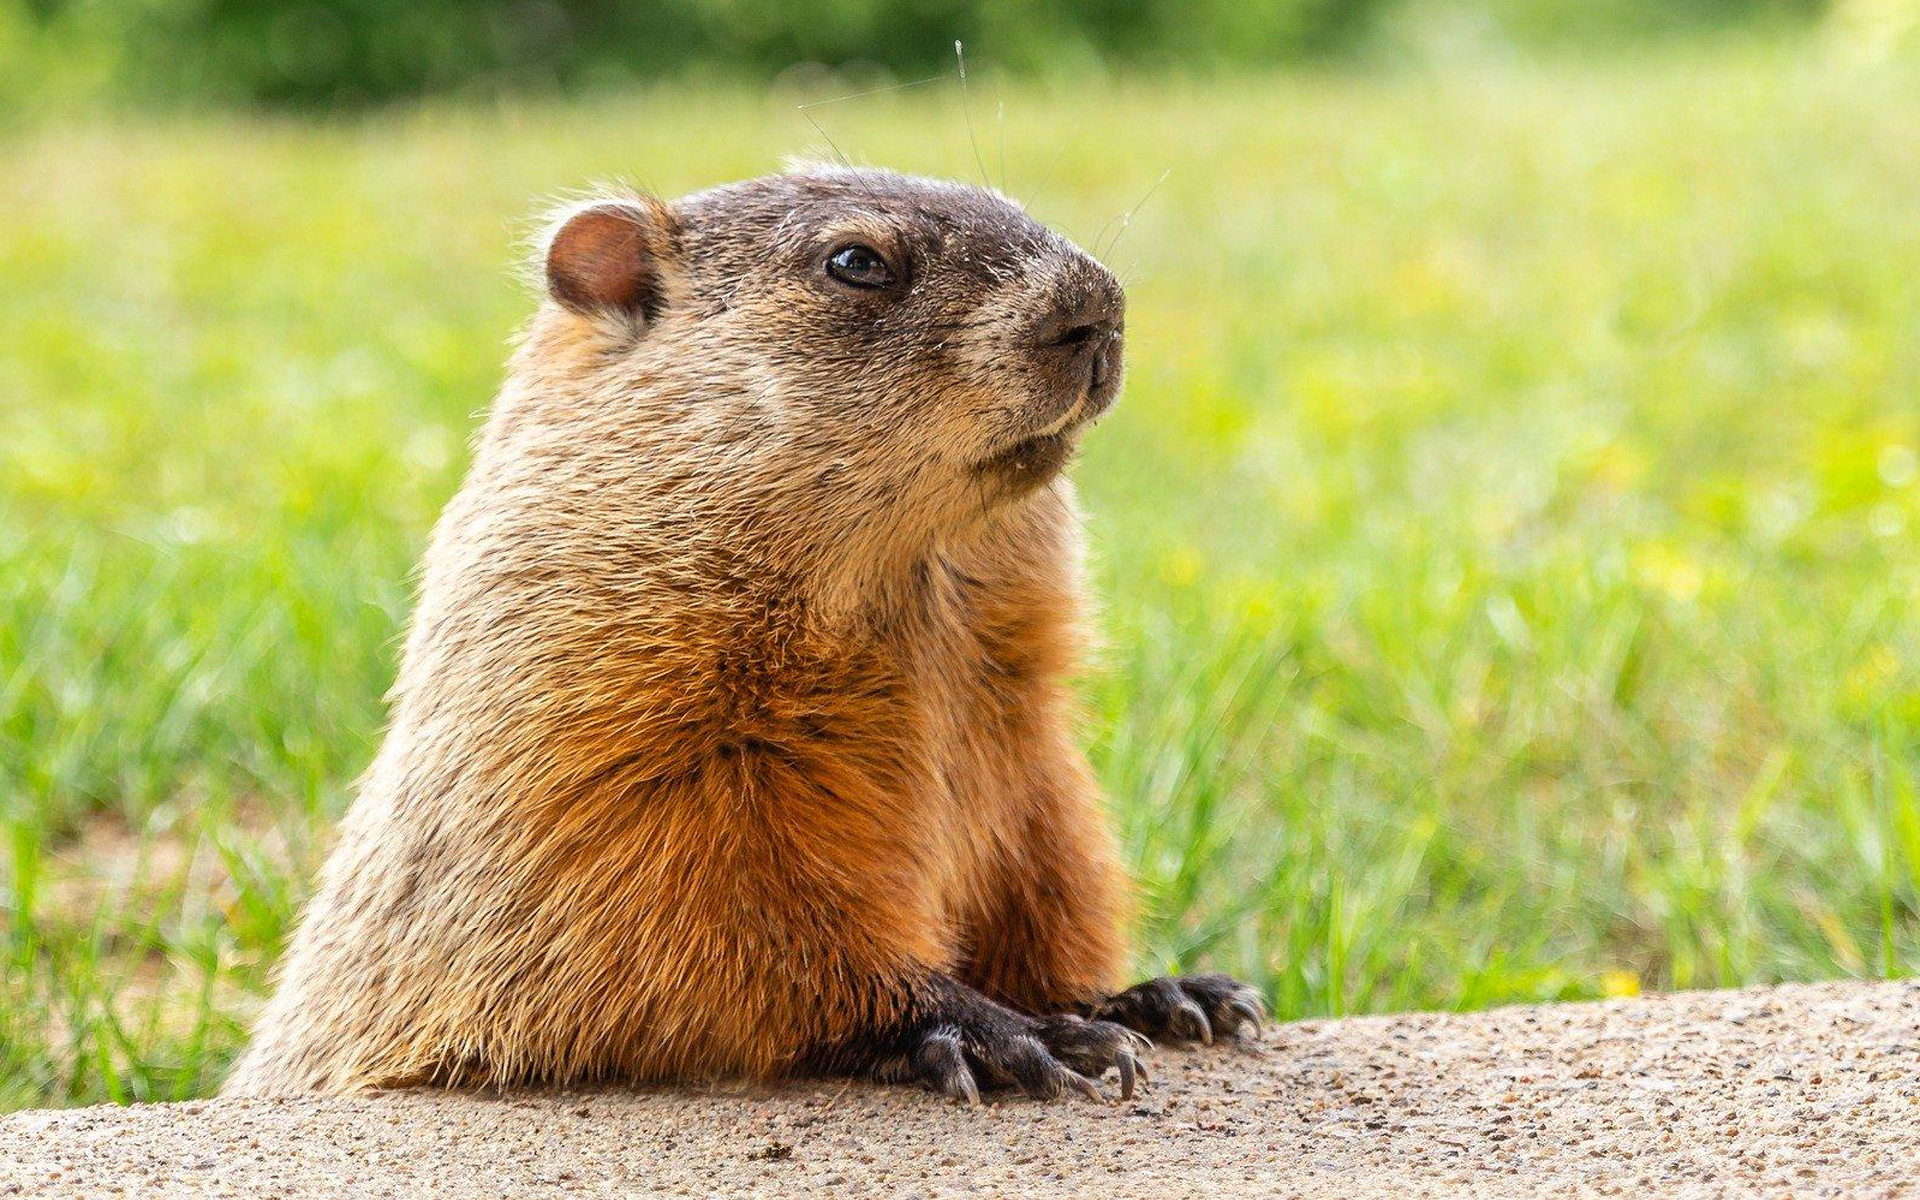 Download wallpaper Groundhog Day, February Groundhog in the grass, woodchuck, Happy Groundhog Day, Groundhog, USA for desktop with resolution 1920x1200. High Quality HD picture wallpaper